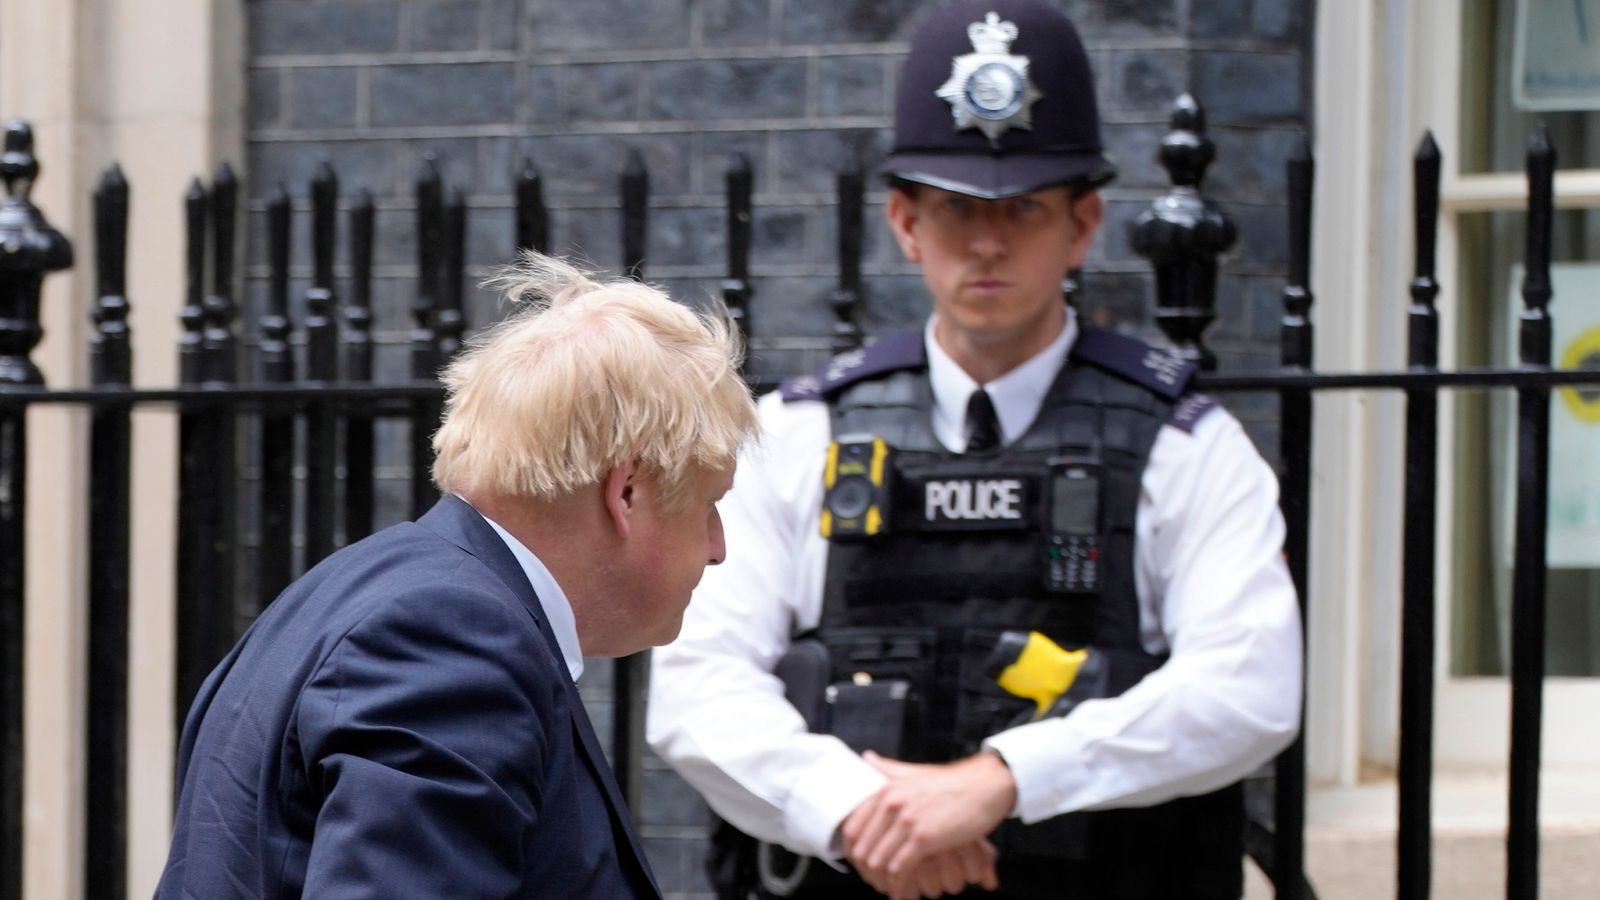 We have a date for the 'trial of Boris Johnson' - and now know what his plan may be